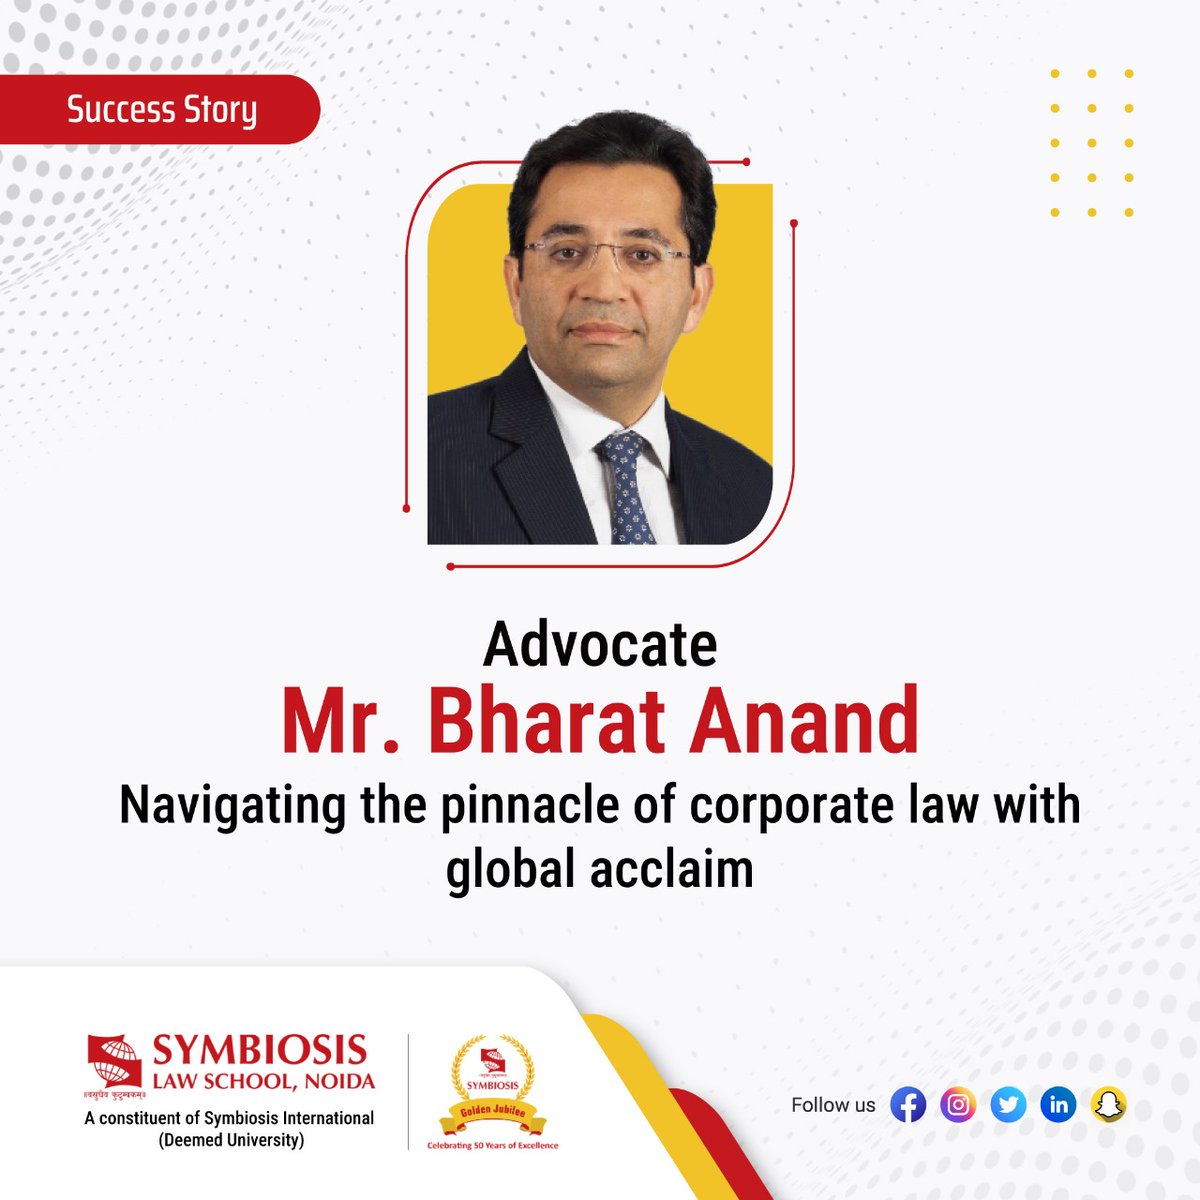 Advocate Mr. Bharat Anand excels in #Corporate and #Commercial law, specialising in M&A. Renowned for strategic insights, he's recognised as a 'Band 1 Lawyer' in Delhi and a Global Leader by Who’s Who Legal. His leadership extends to major industry associations. #LegalLegacy